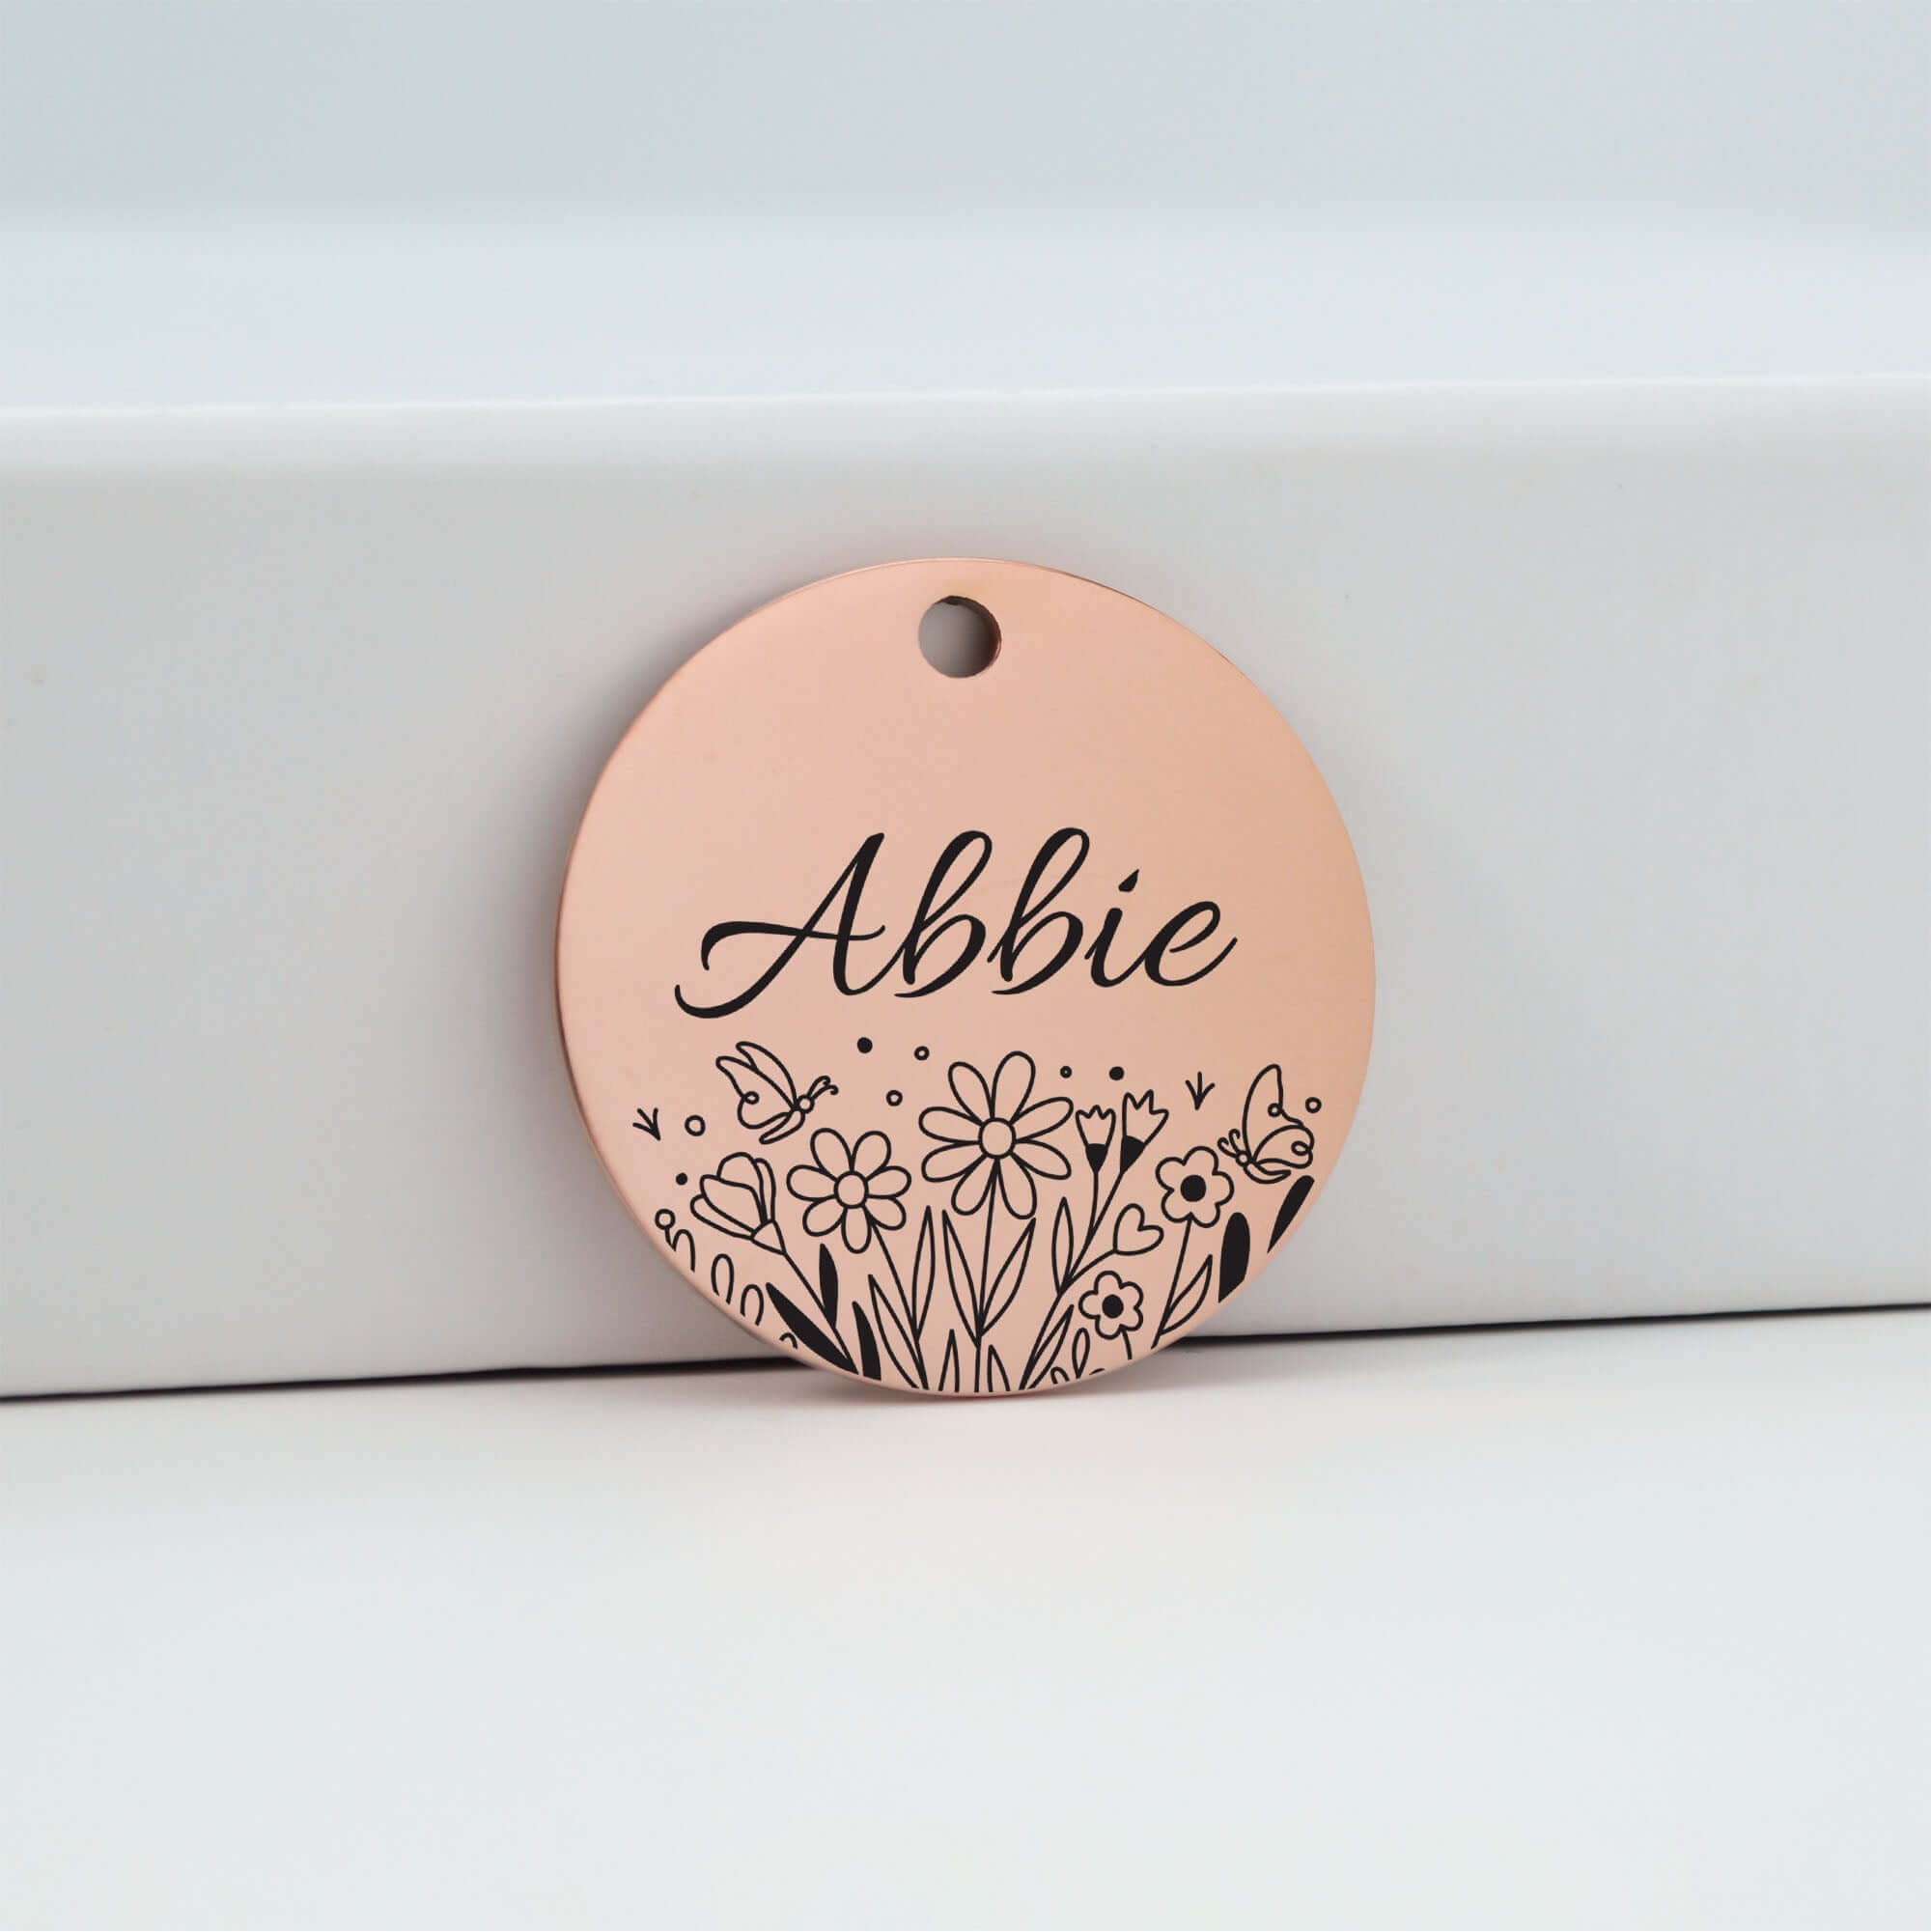 Engraved dog tags